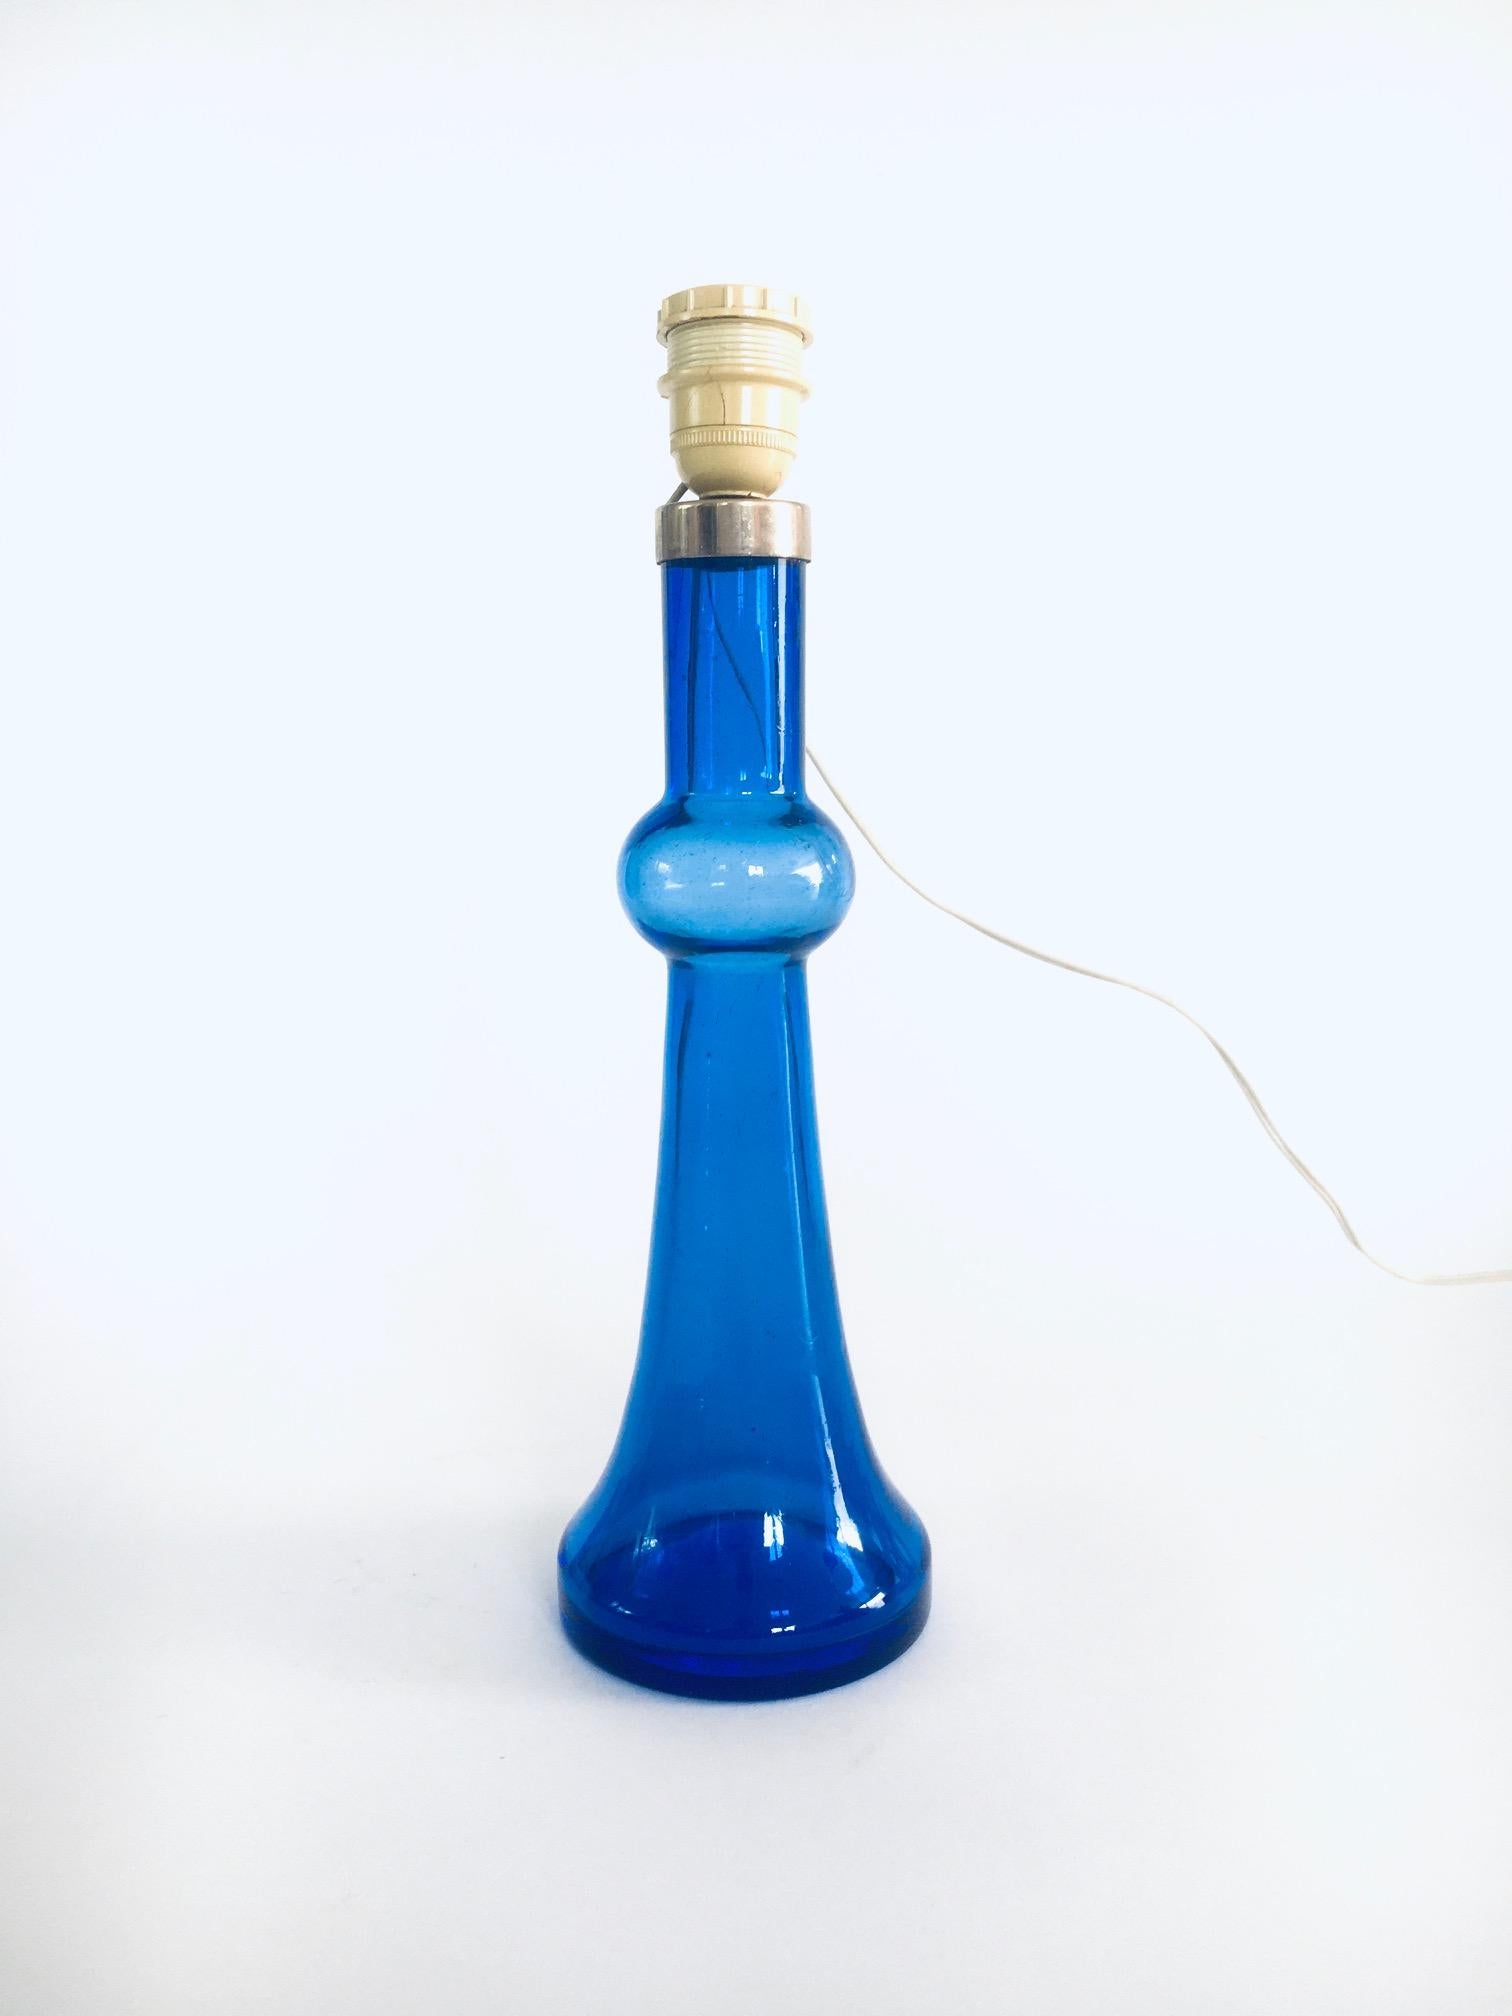 Vintage Midcentury Design Blue Glass Table Lamp by Nanny Still for Raak, Amsterdam, Netherlands, 1960's / 70's. Blue color glass lamp base with original fittings. Handmade glass. This comes in very good, original condition. Measures (not including